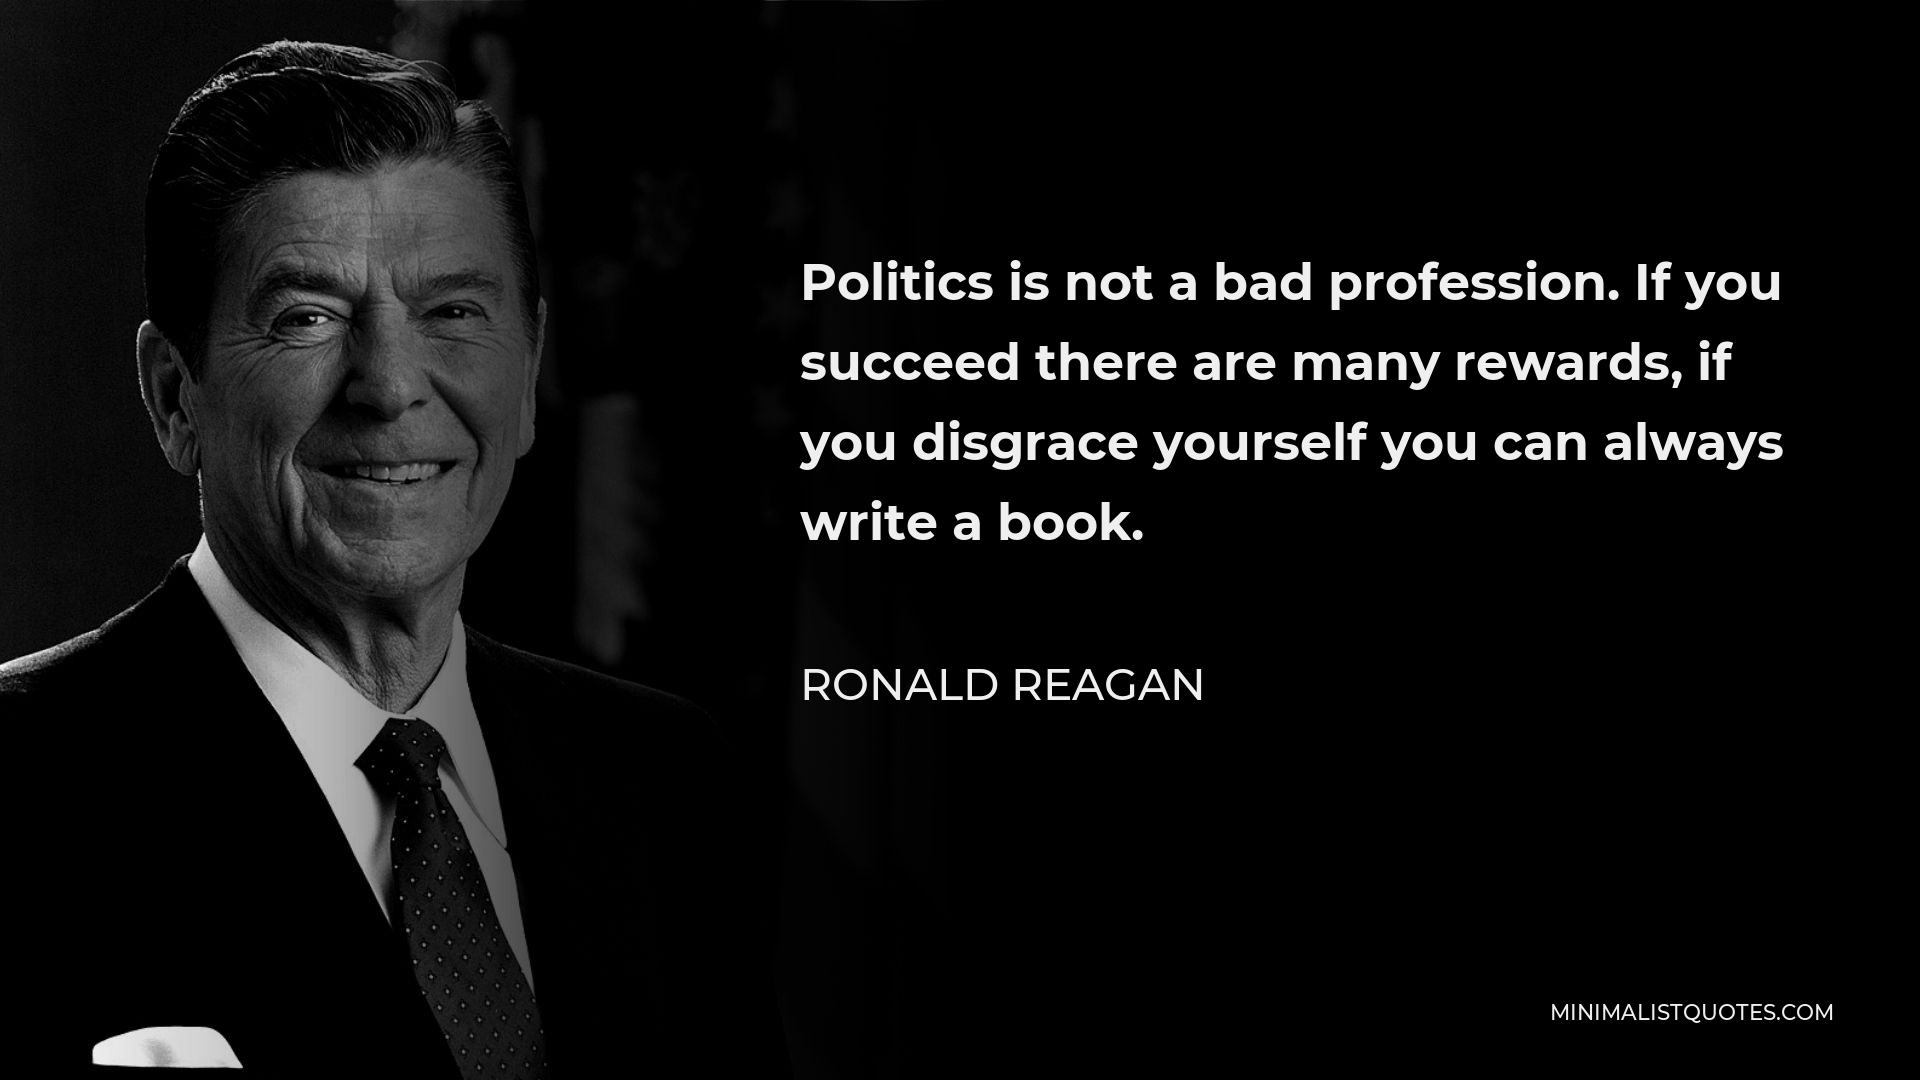 Ronald Reagan Quote - Politics is not a bad profession. If you succeed there are many rewards, if you disgrace yourself you can always write a book.